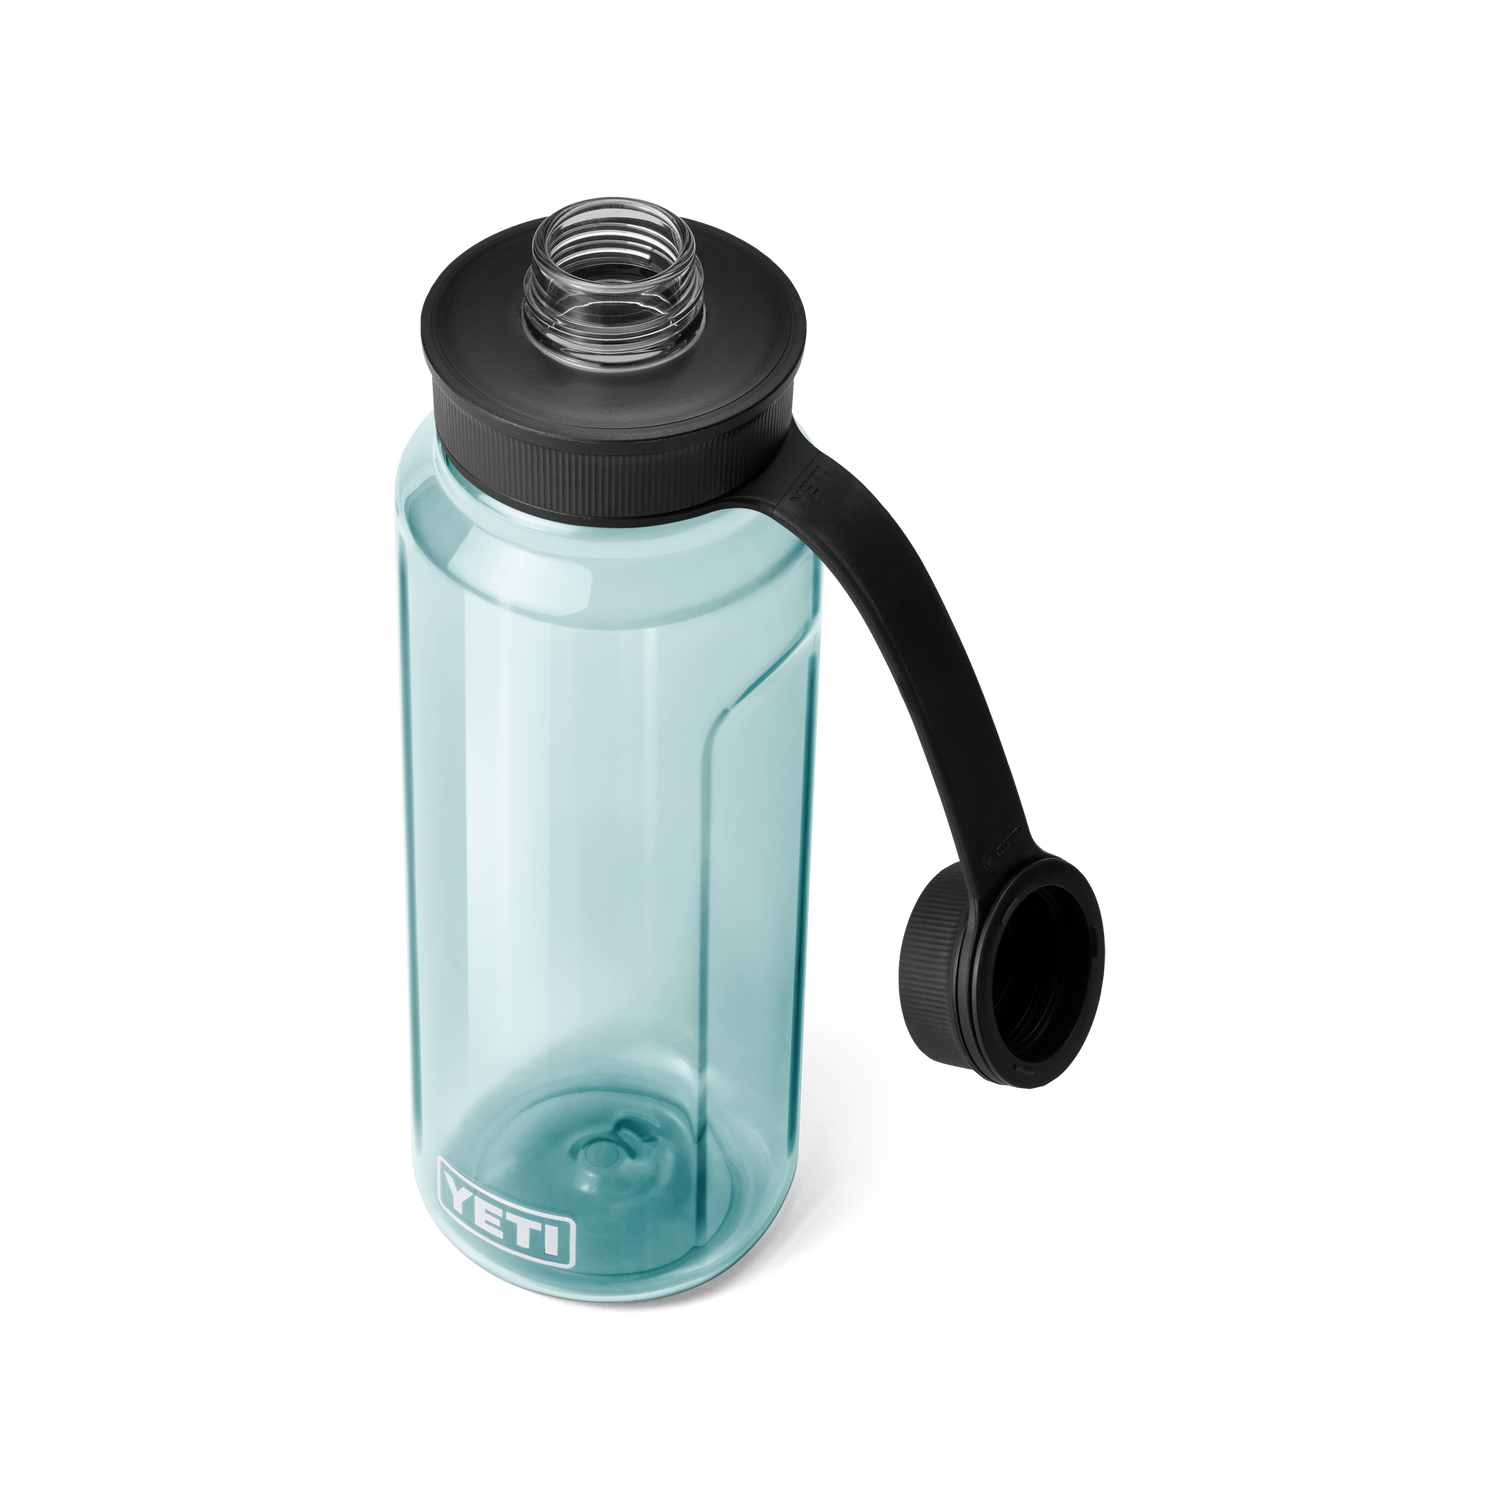 site_studio_Drinkware_Yonder_Tether_Accs_1L_Seafoam_3qtr_Open_0818_Primary_B_2400x2400.png